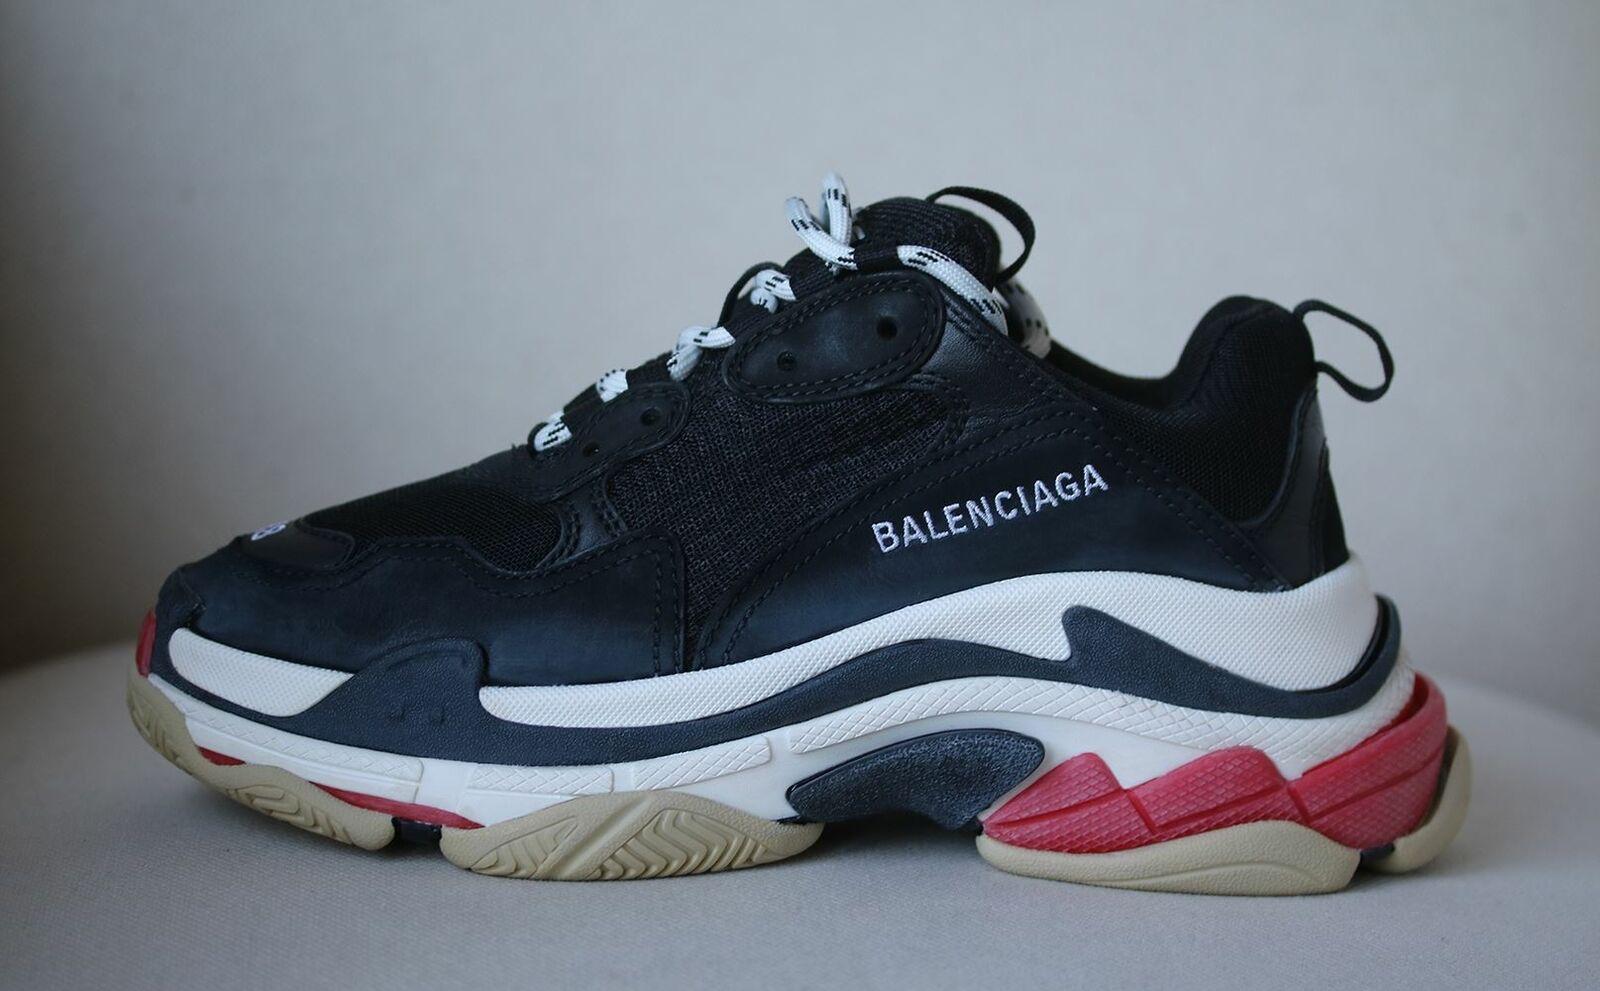 Balenciaga's coveted 'Triple S' design are the archetype of the season's 'dad sneaker' trend, so it's no surprise they're selling out so fast. This iteration is set on the signature triple-stacked sole and has panels of lightly faded leather for a